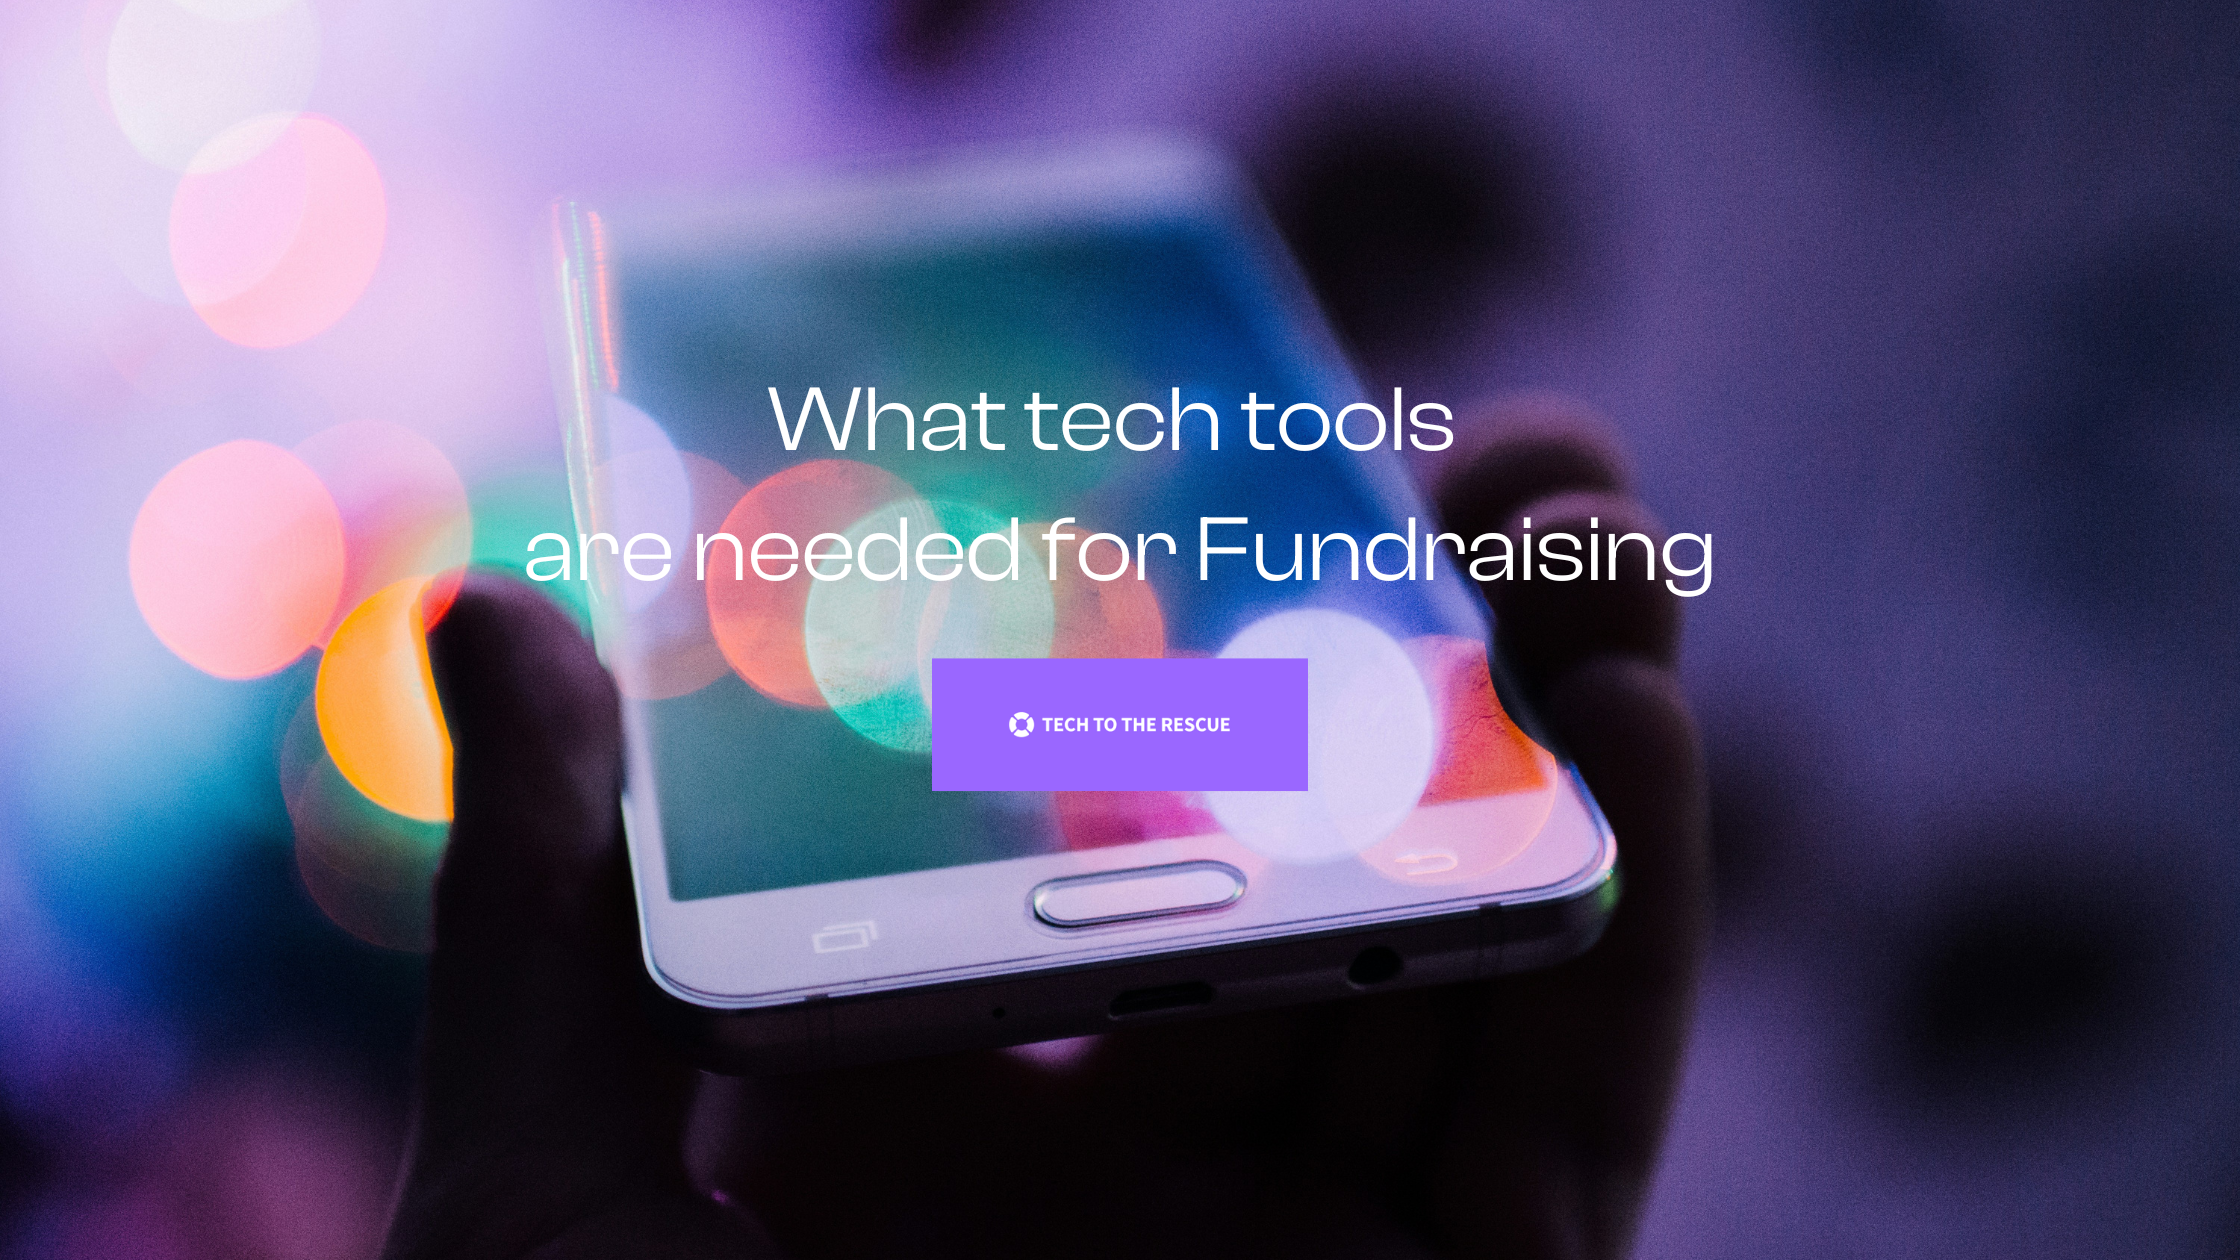 Image : Which digital tools are essential for fundraising efforts